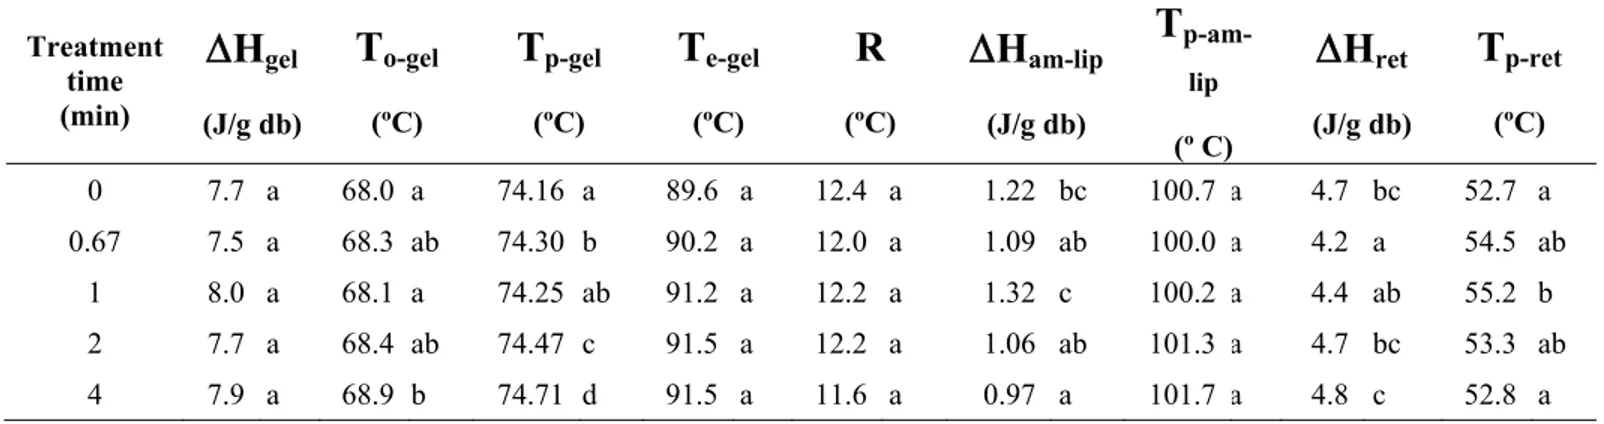 Table 3. Thermal properties of aqueous dispersions (70 % water) of flour treated by microwaves (at 25% water content)